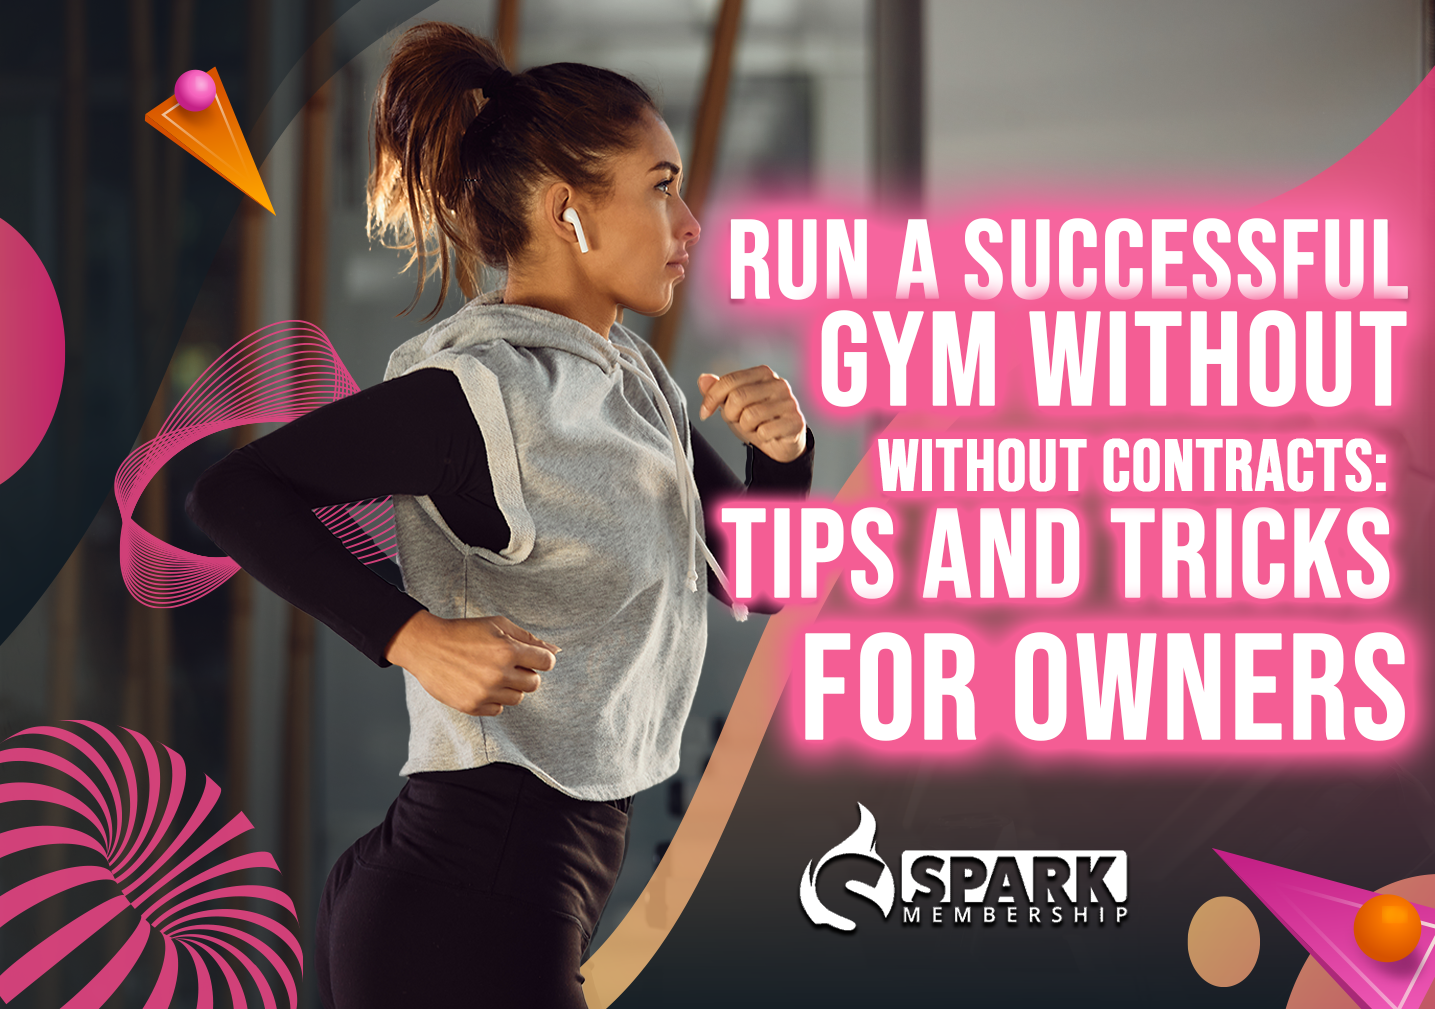 Run a Successful Gym Without Contracts: Tips and Tricks for Owners